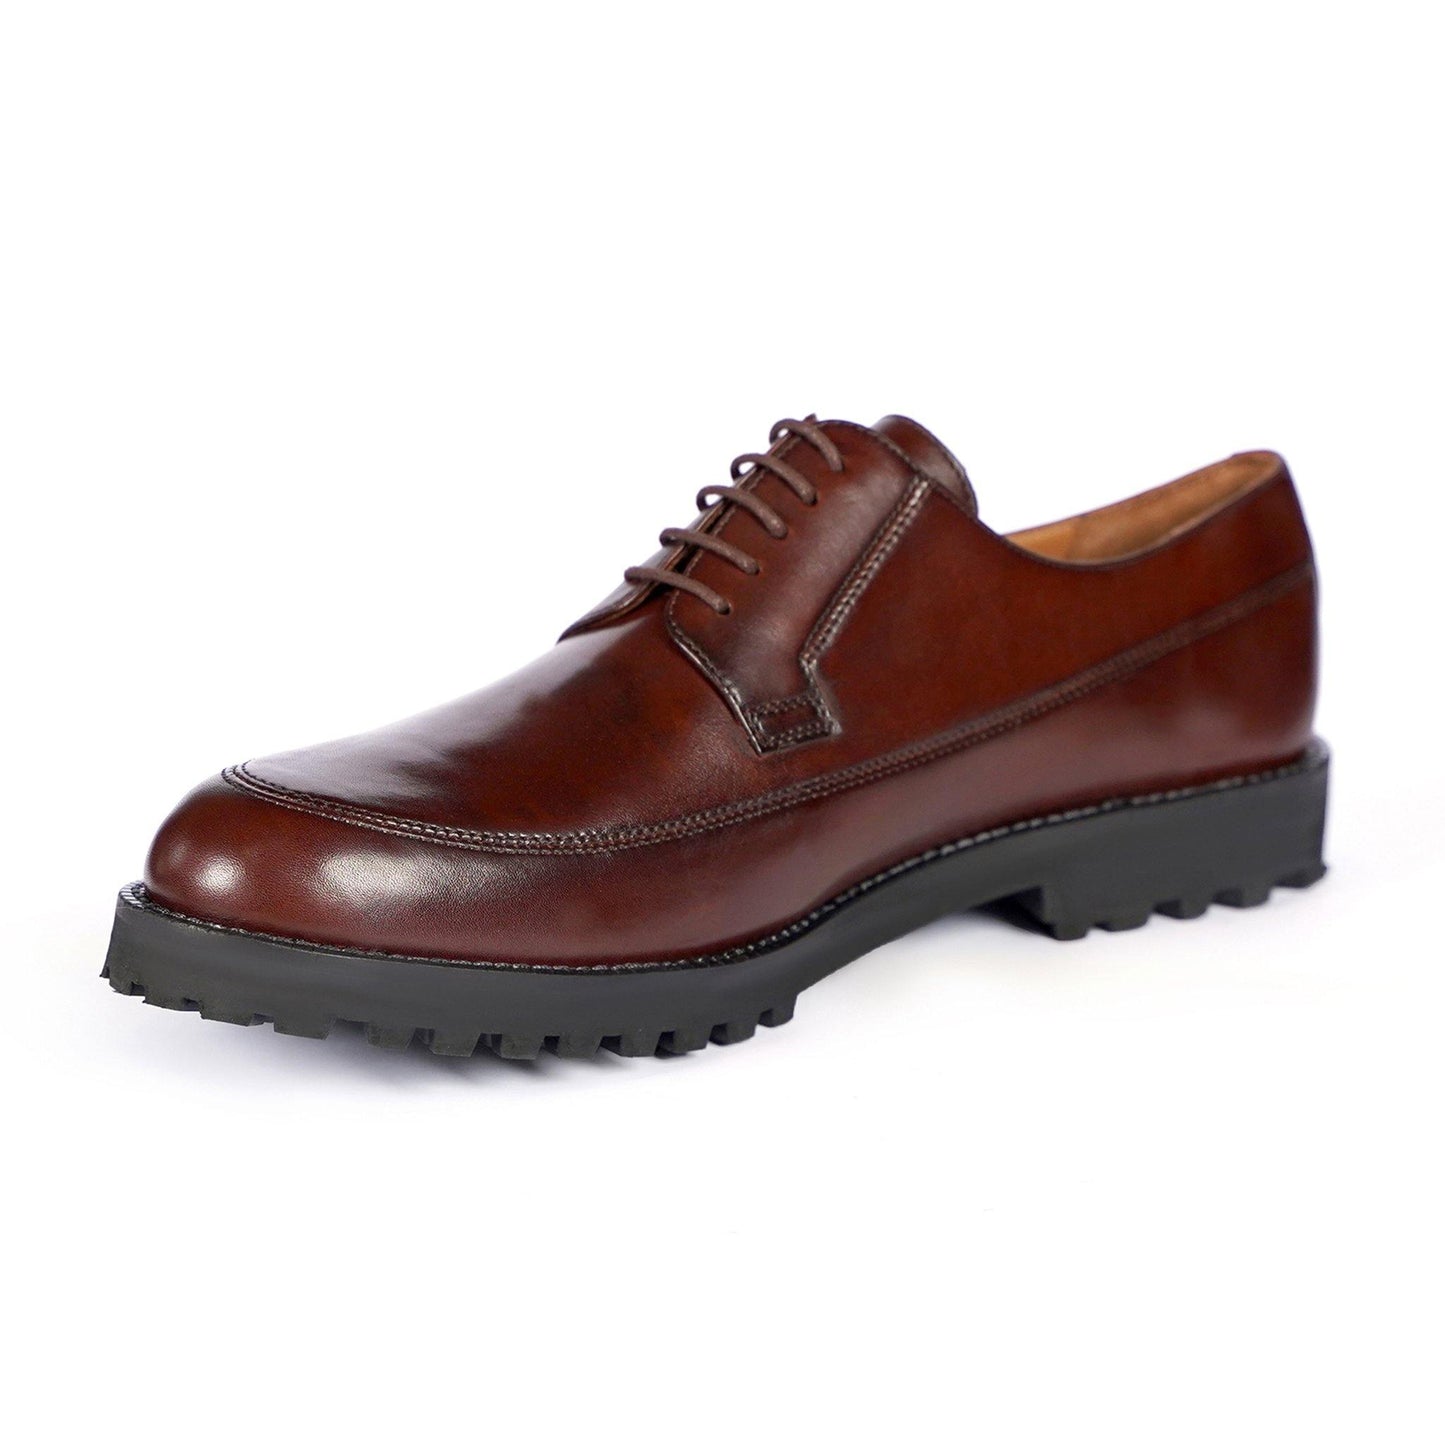 Mens Derby Shoes | Suede & Leather Shoes Derby Boots, derby shoes, derby shoes men, Leather Boots